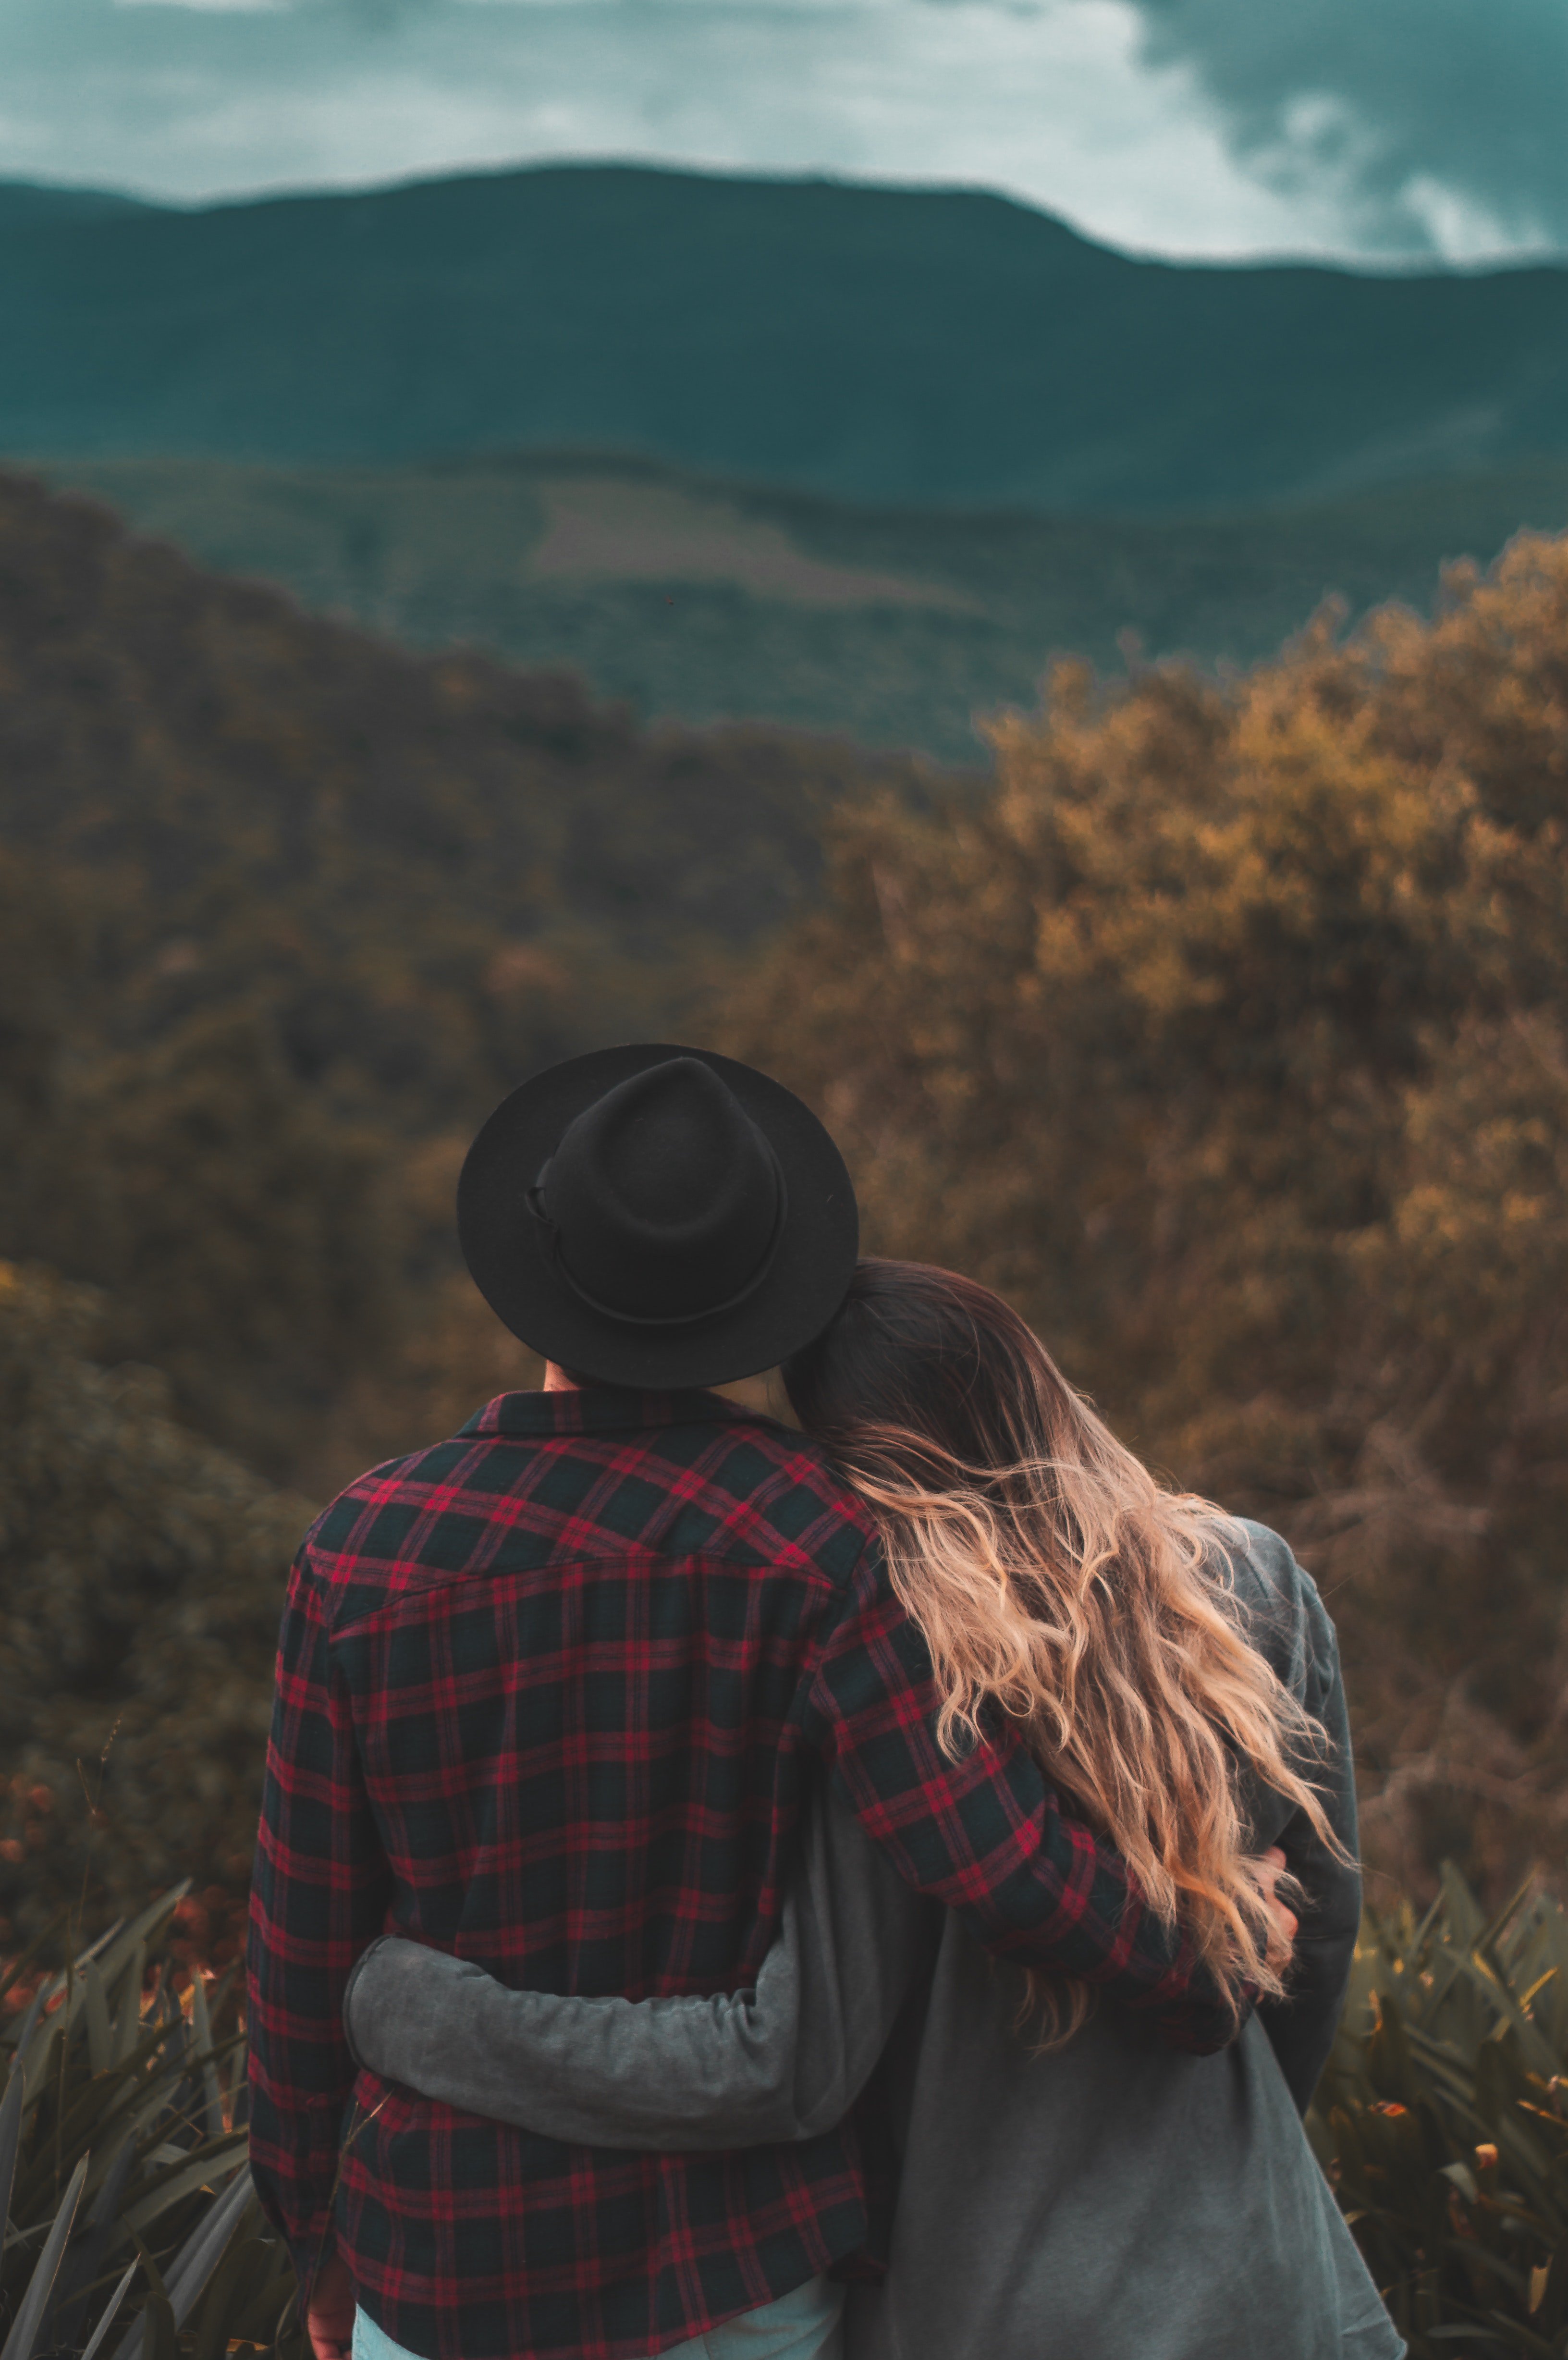 A couple standing on top of a hill with the woman resting her head on her man's shoulder | Source: Pexels 